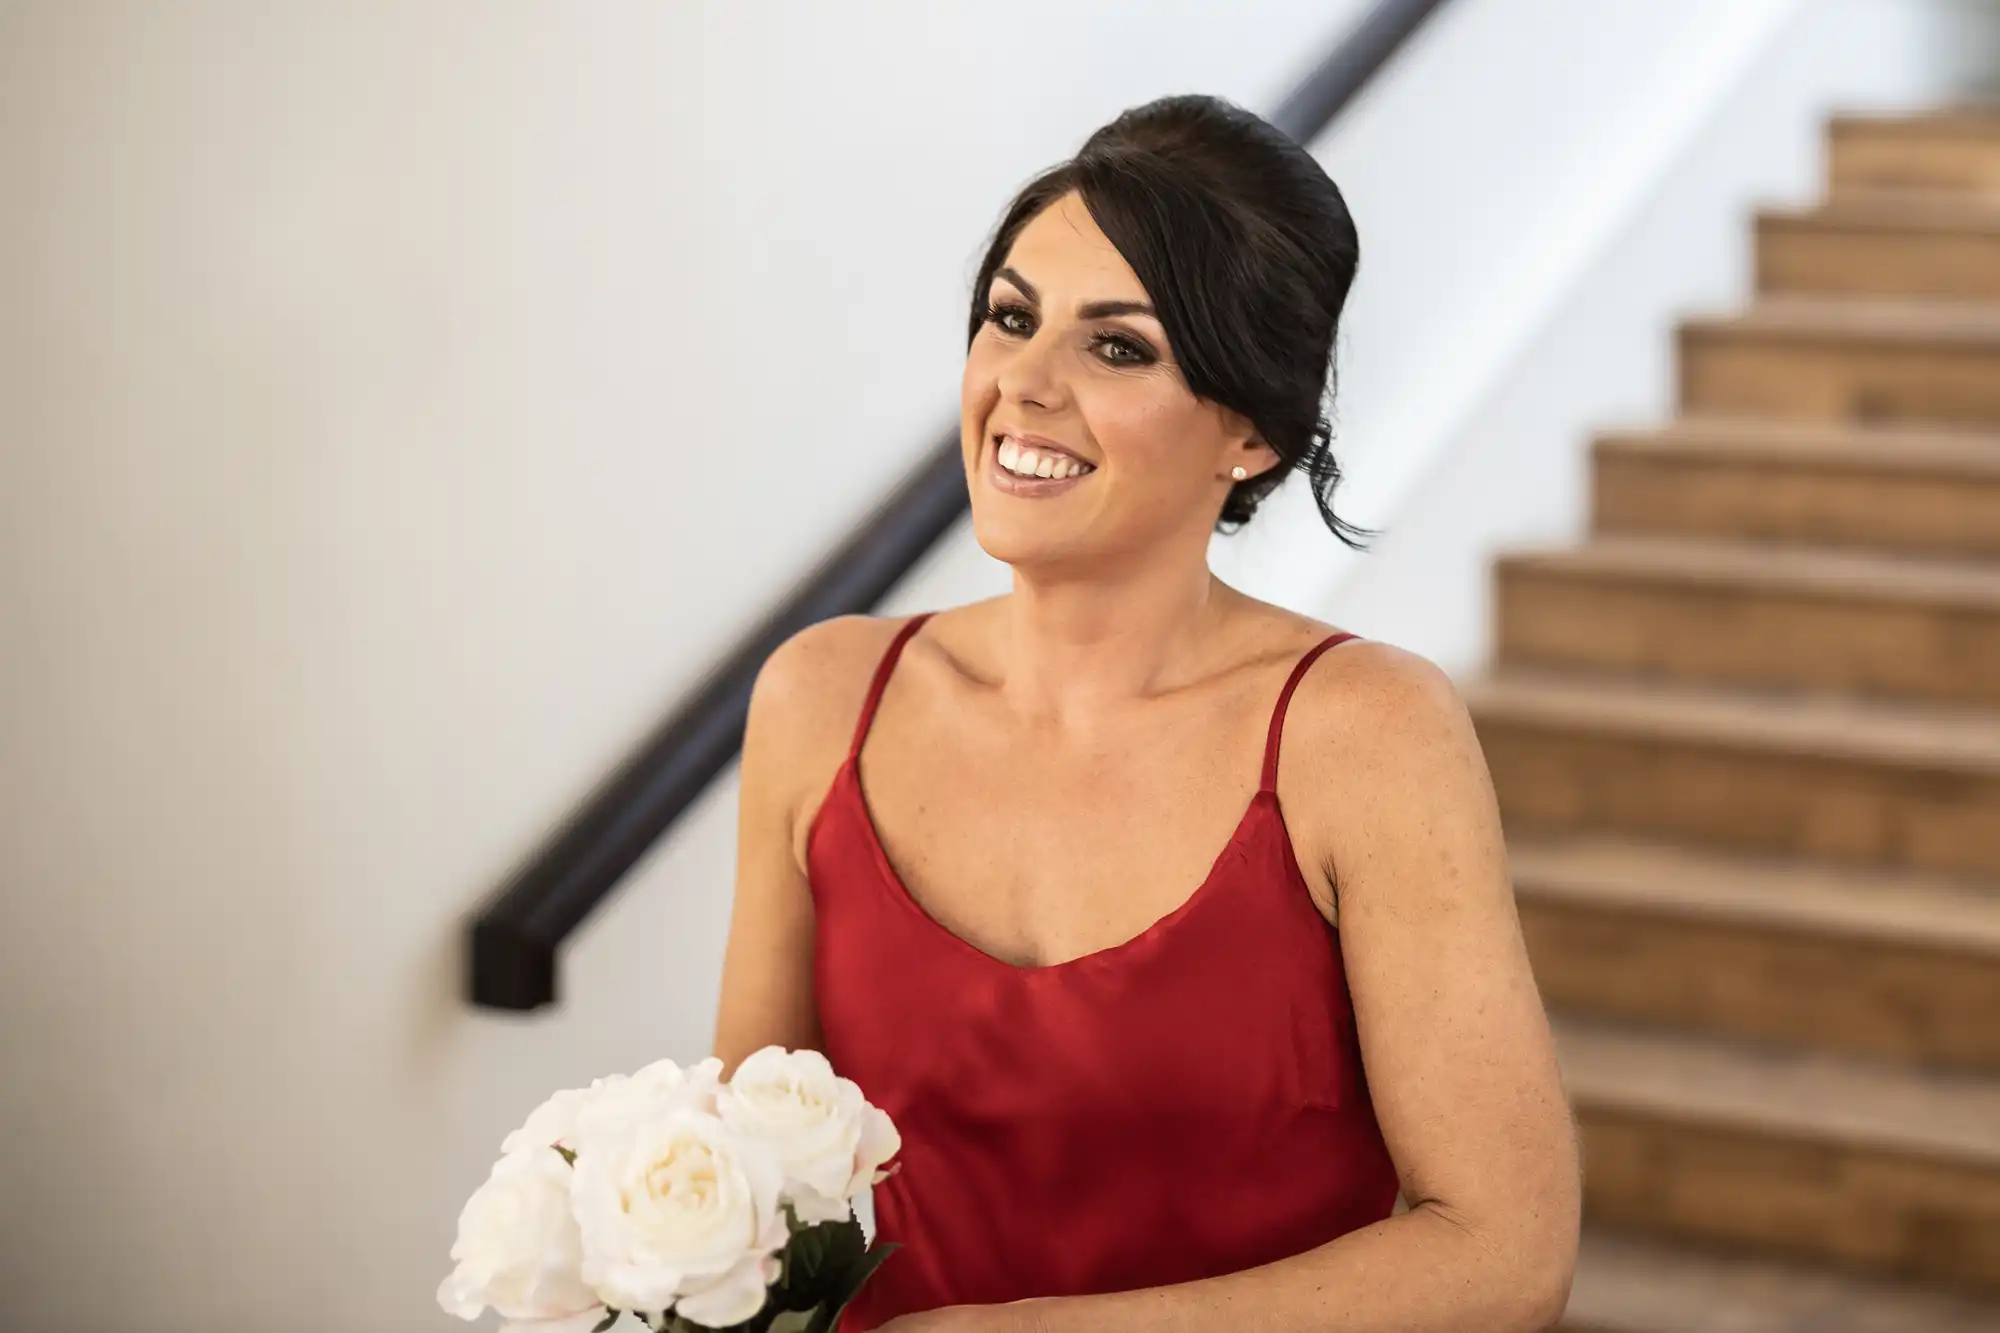 A woman in a red dress holds white flowers and smiles while standing near a staircase.